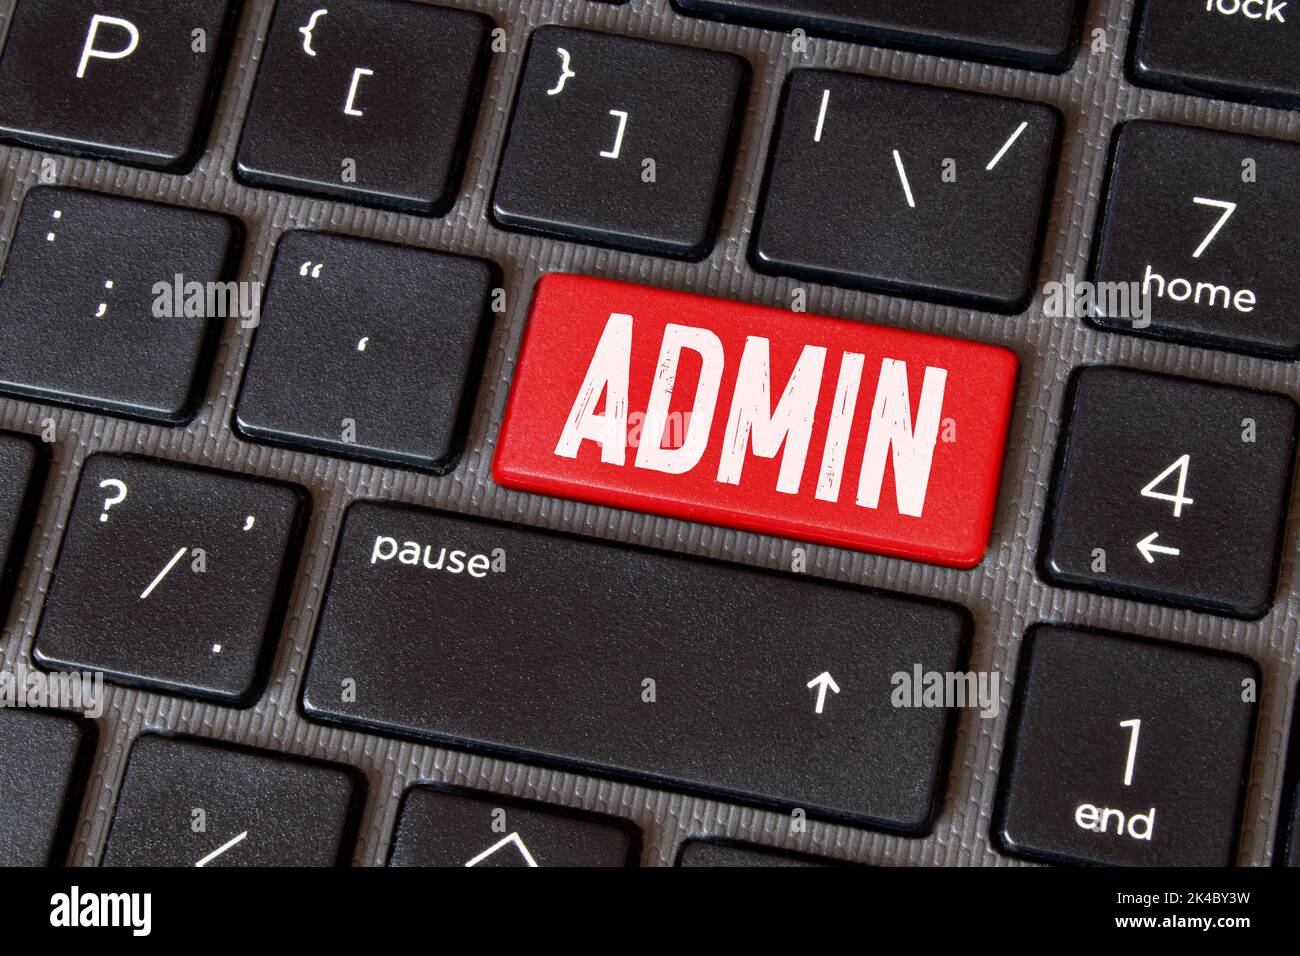 Admin word in red keyboard buttons Stock Photo